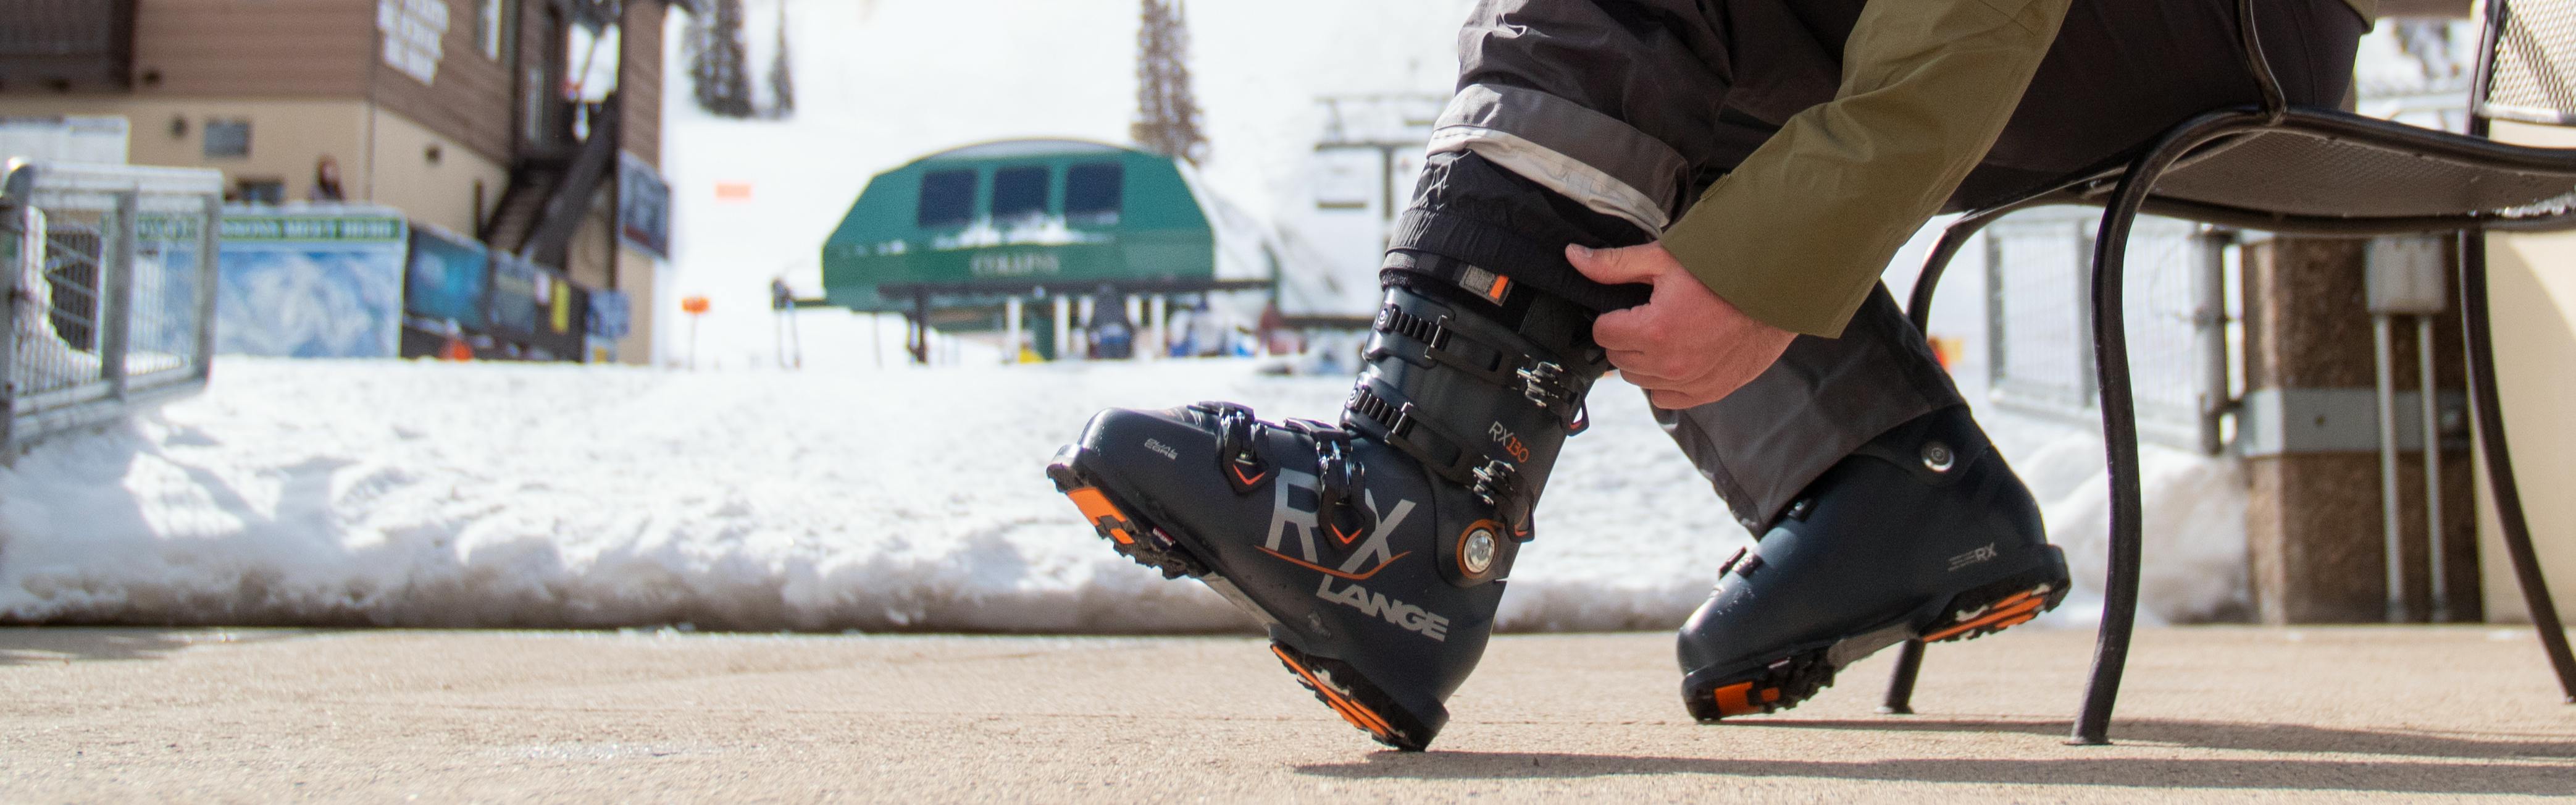 Why Do My Ski Boots Hurt? The 5 Rules to Make Your Ski Boots More